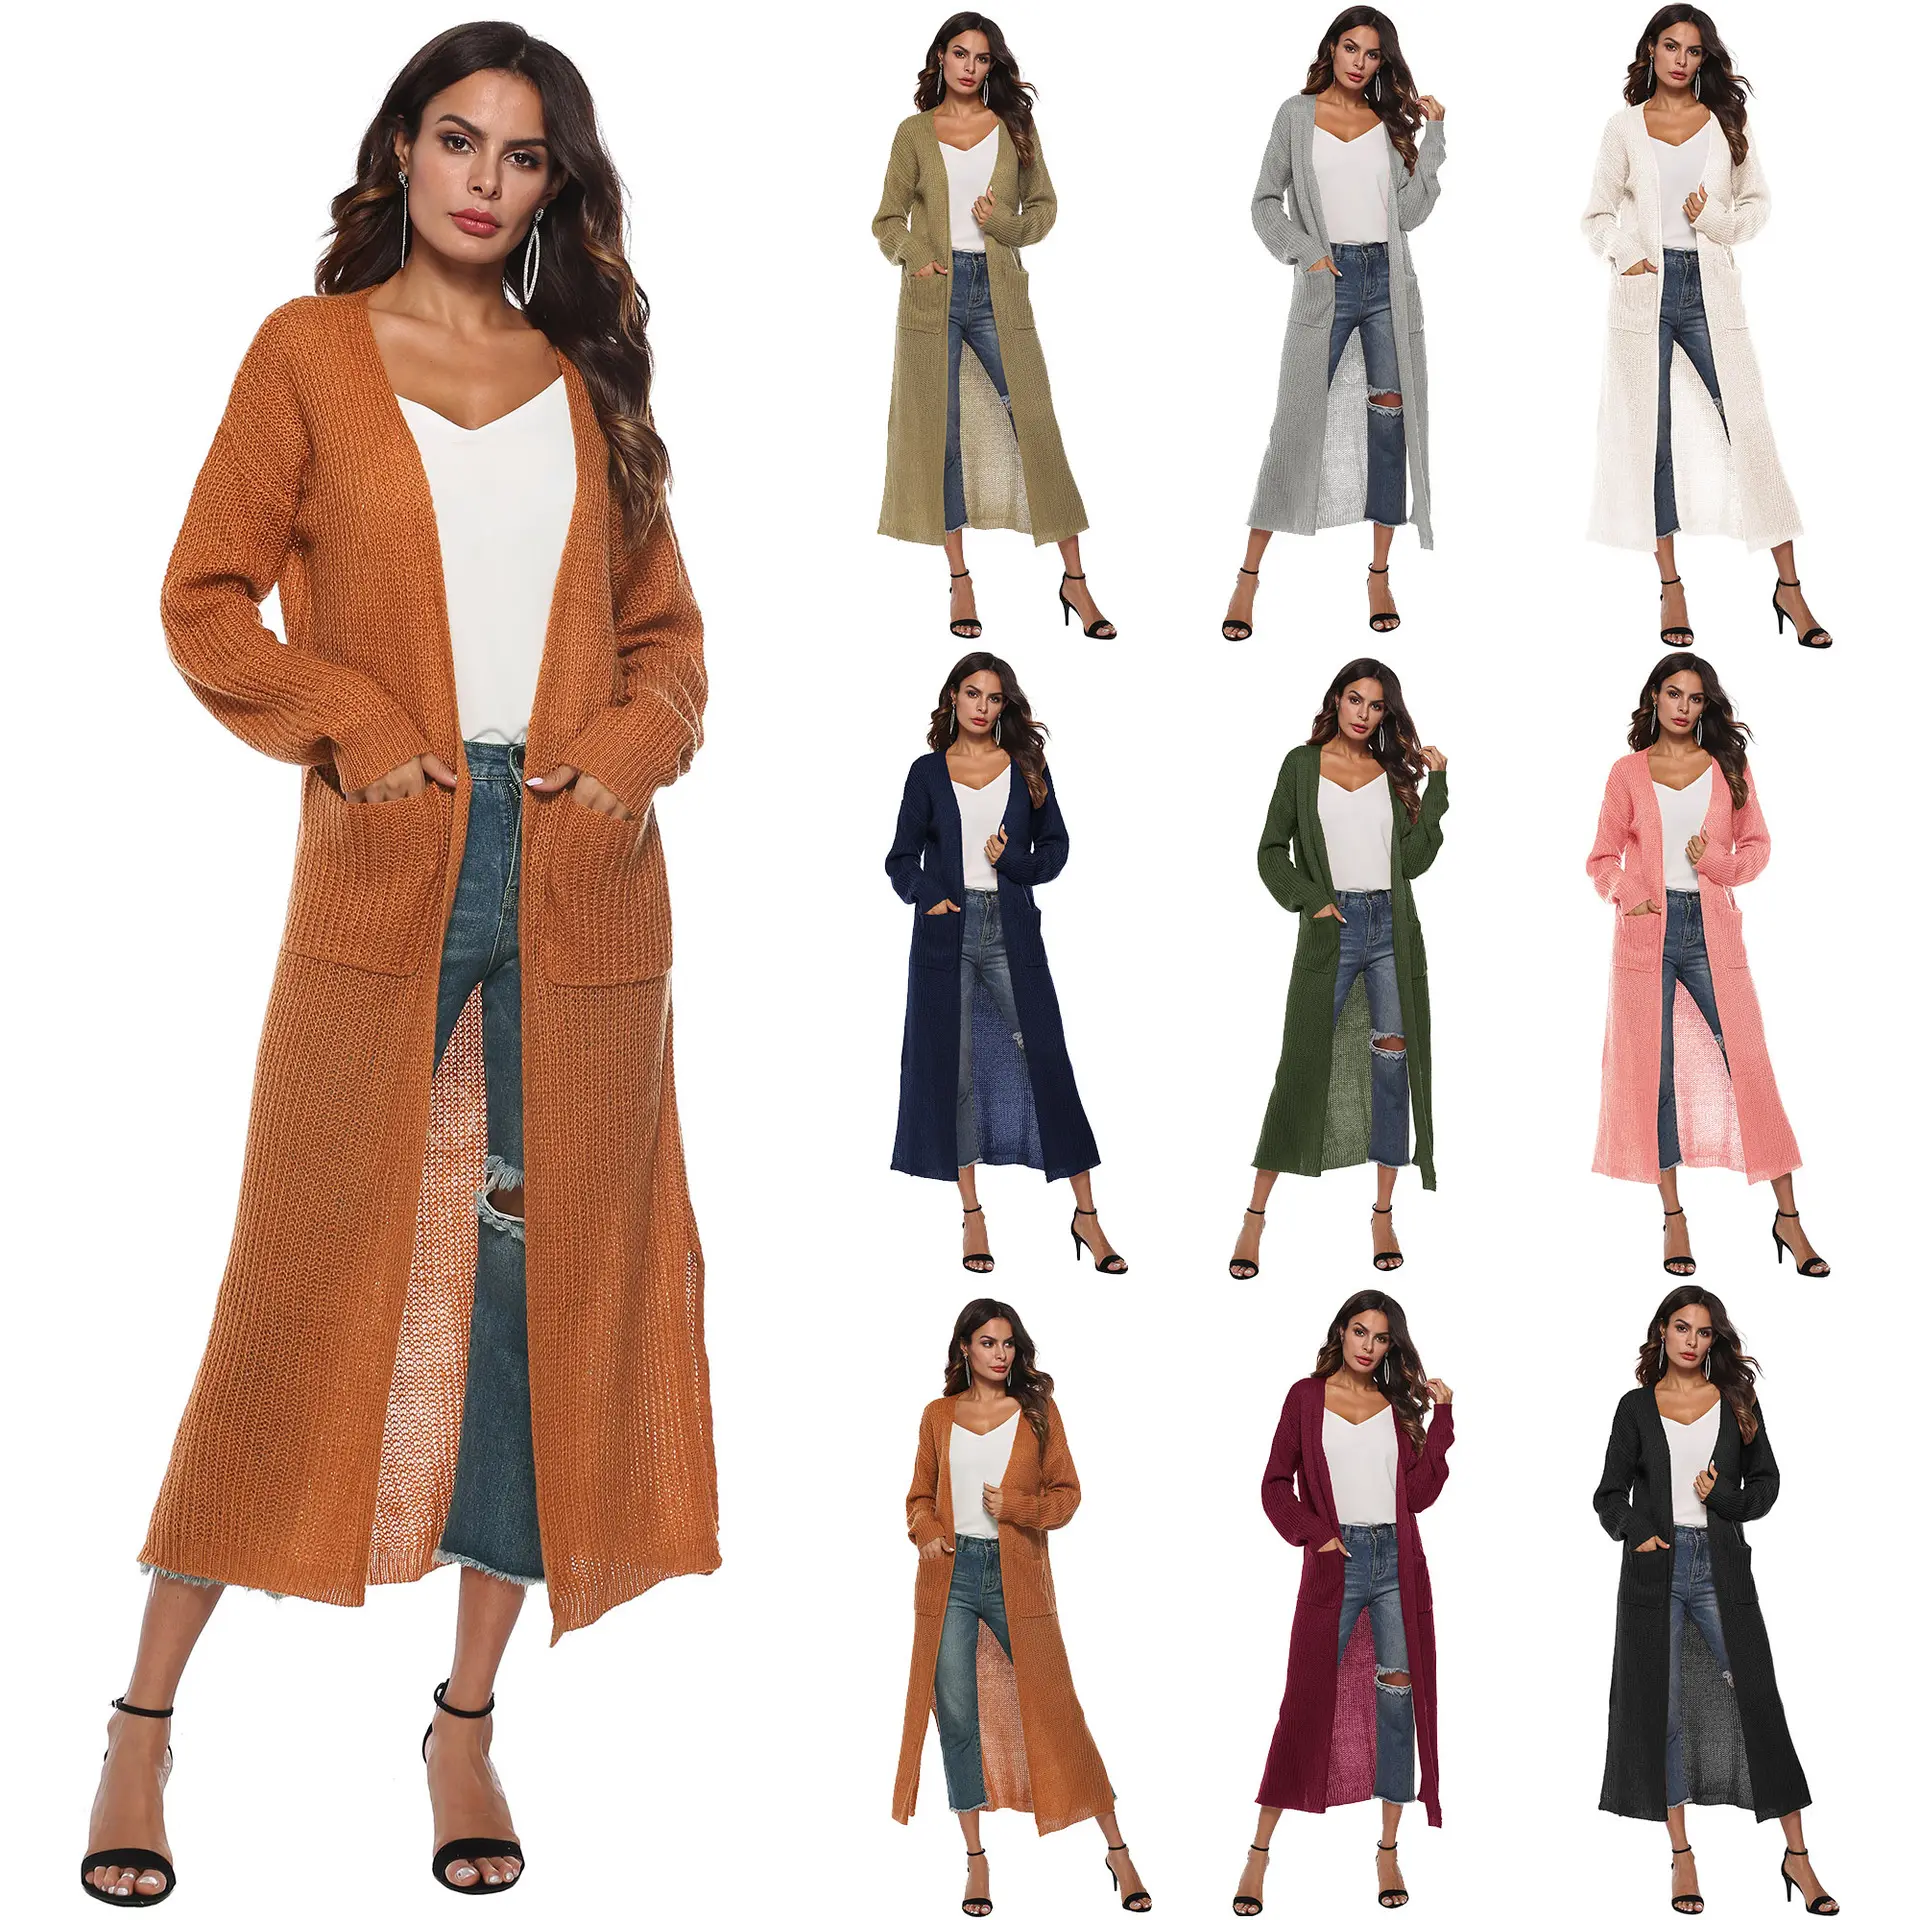 High Quality Fashion Women Pocket Cardigans for Ladies Knit Long Cardigan Sweater